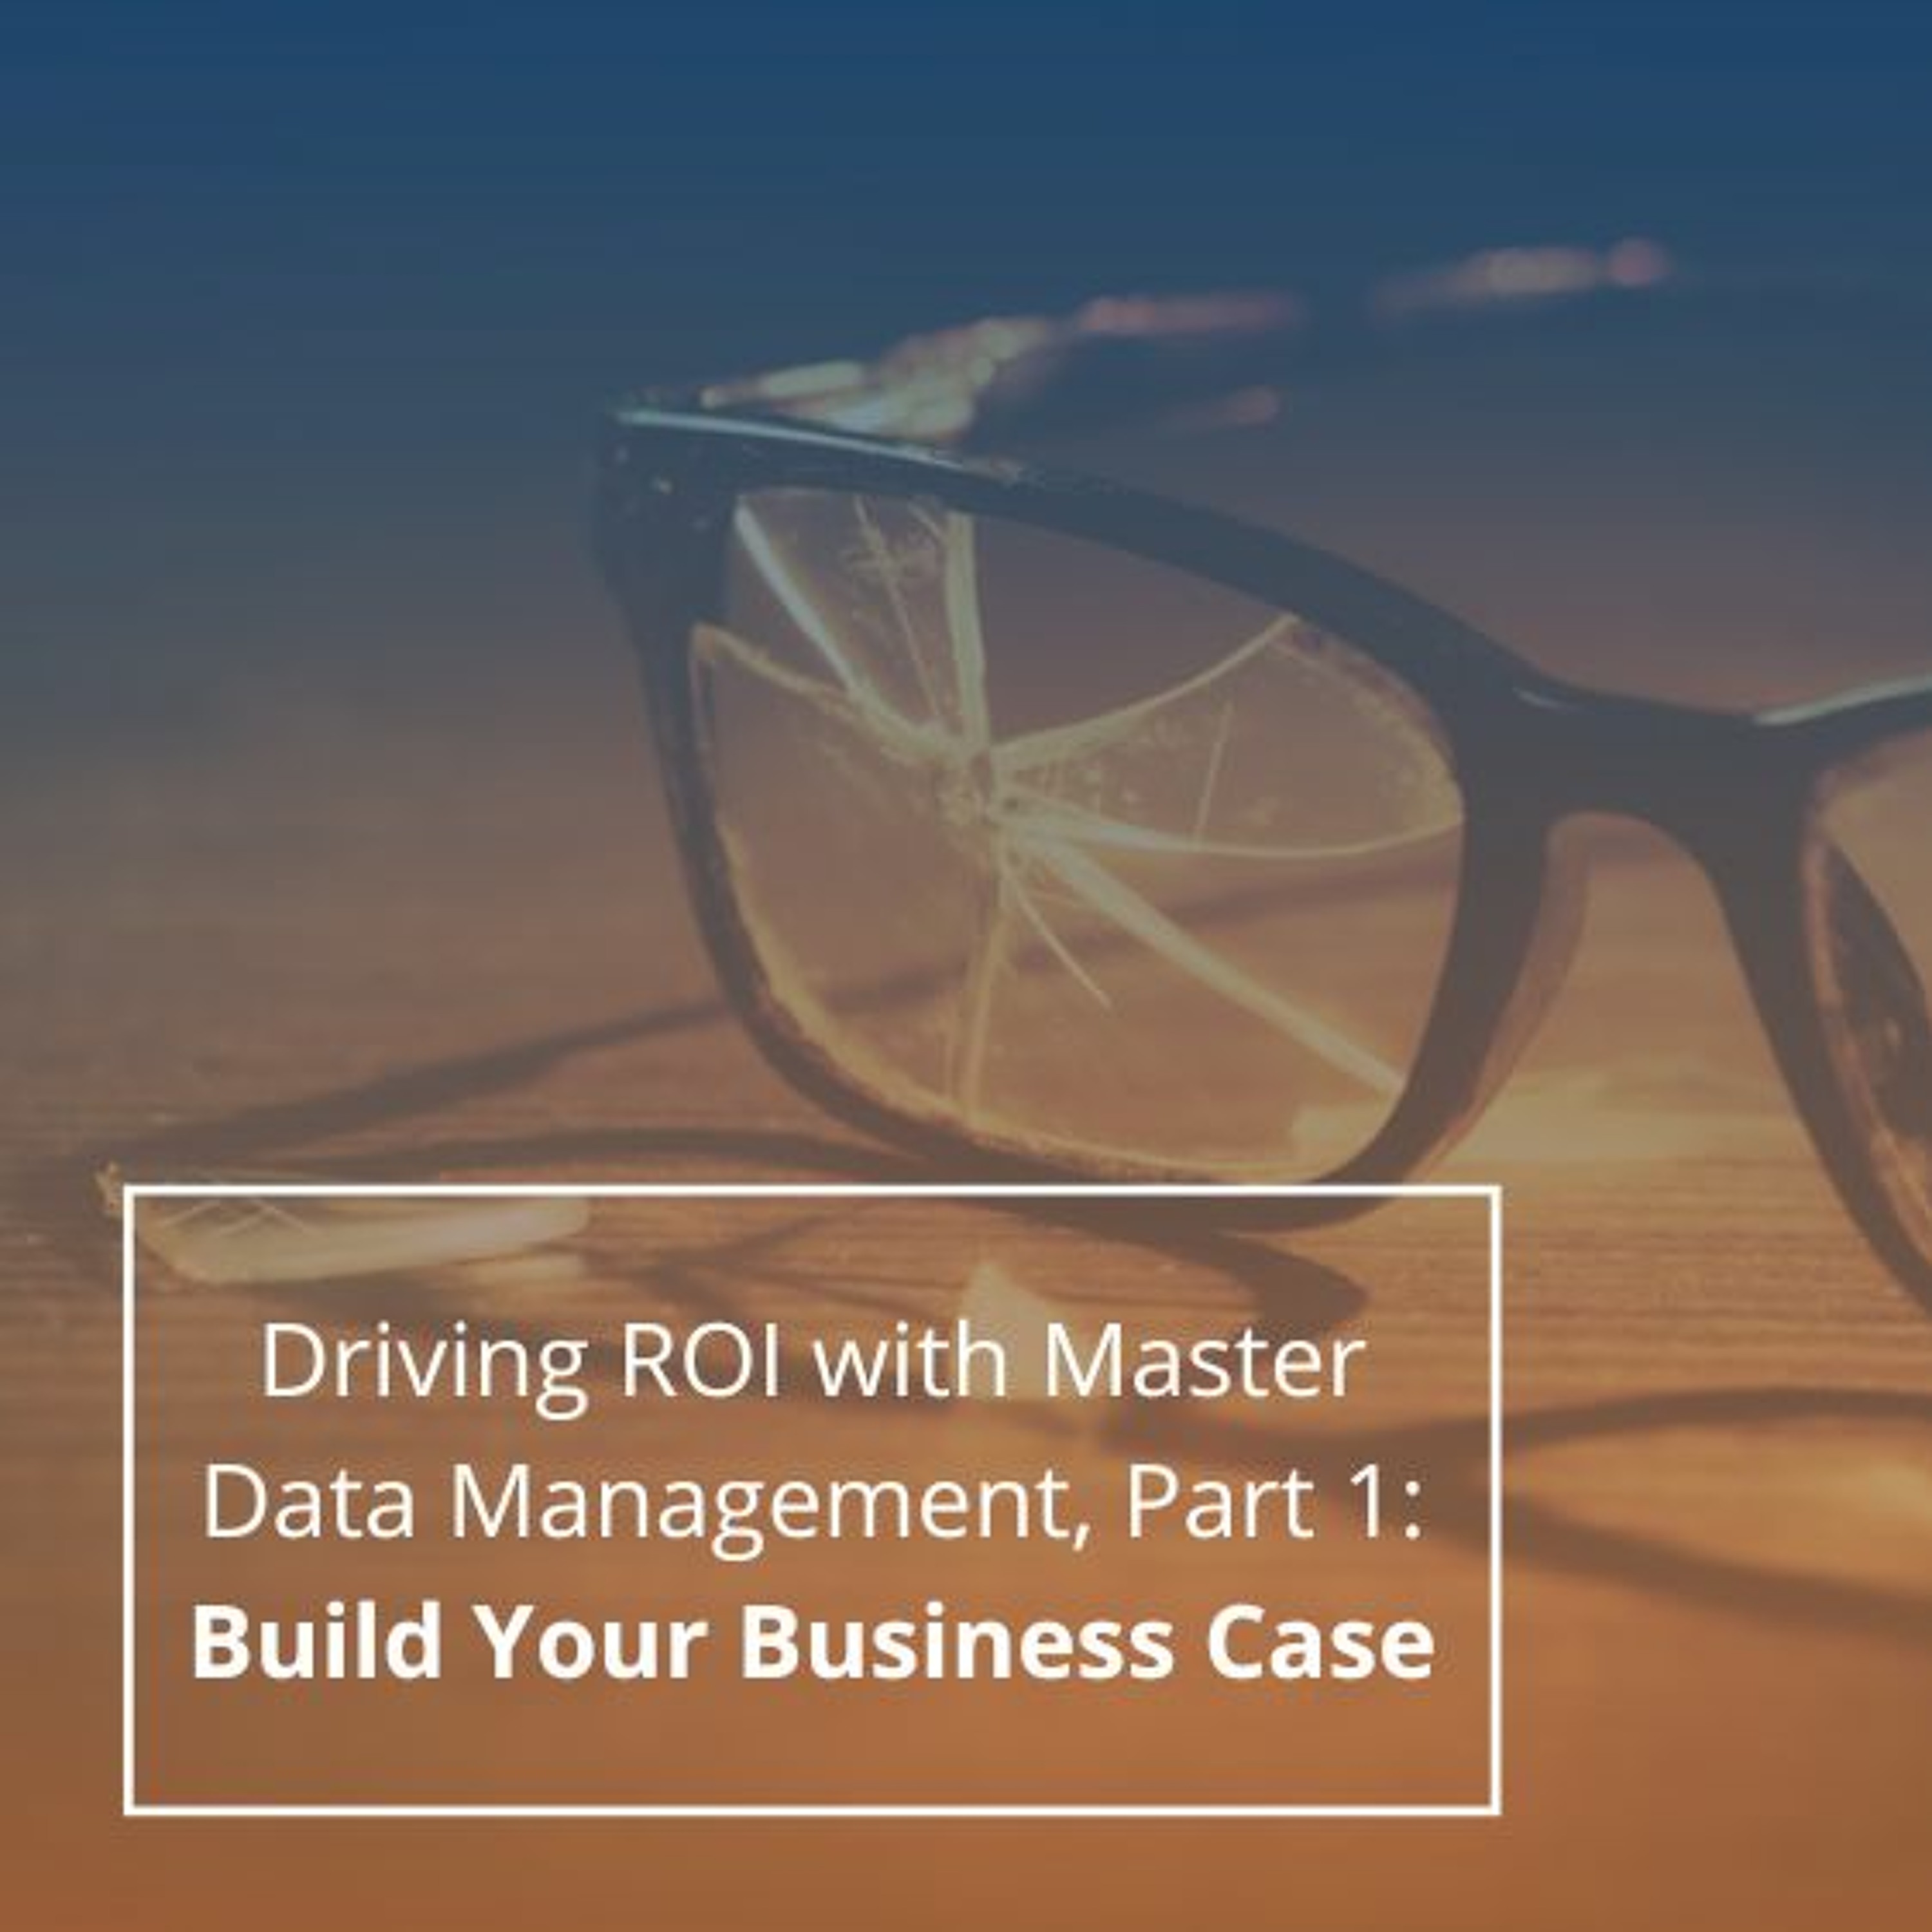 Driving ROI with Master Data Management, Part 1: Build Your Business Case - Audio Blog